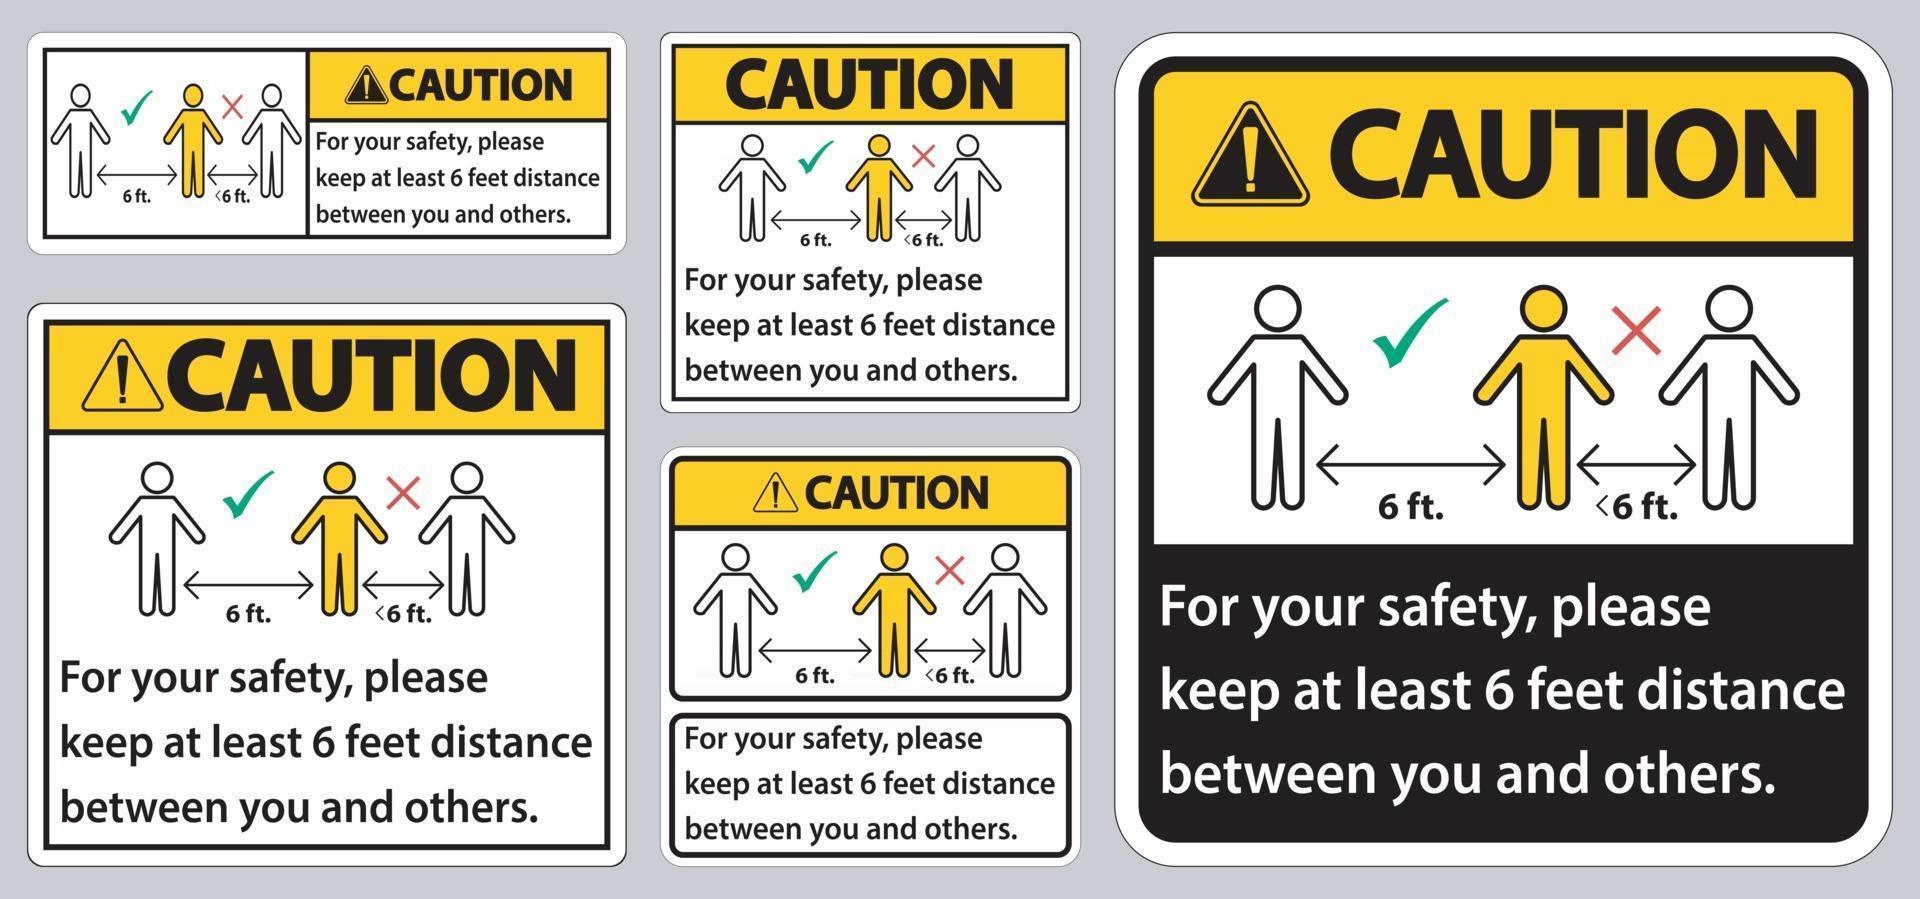 Caution Keep 6 Feet Distance,For your safety,please keep at least 6 feet distance between you and others. vector